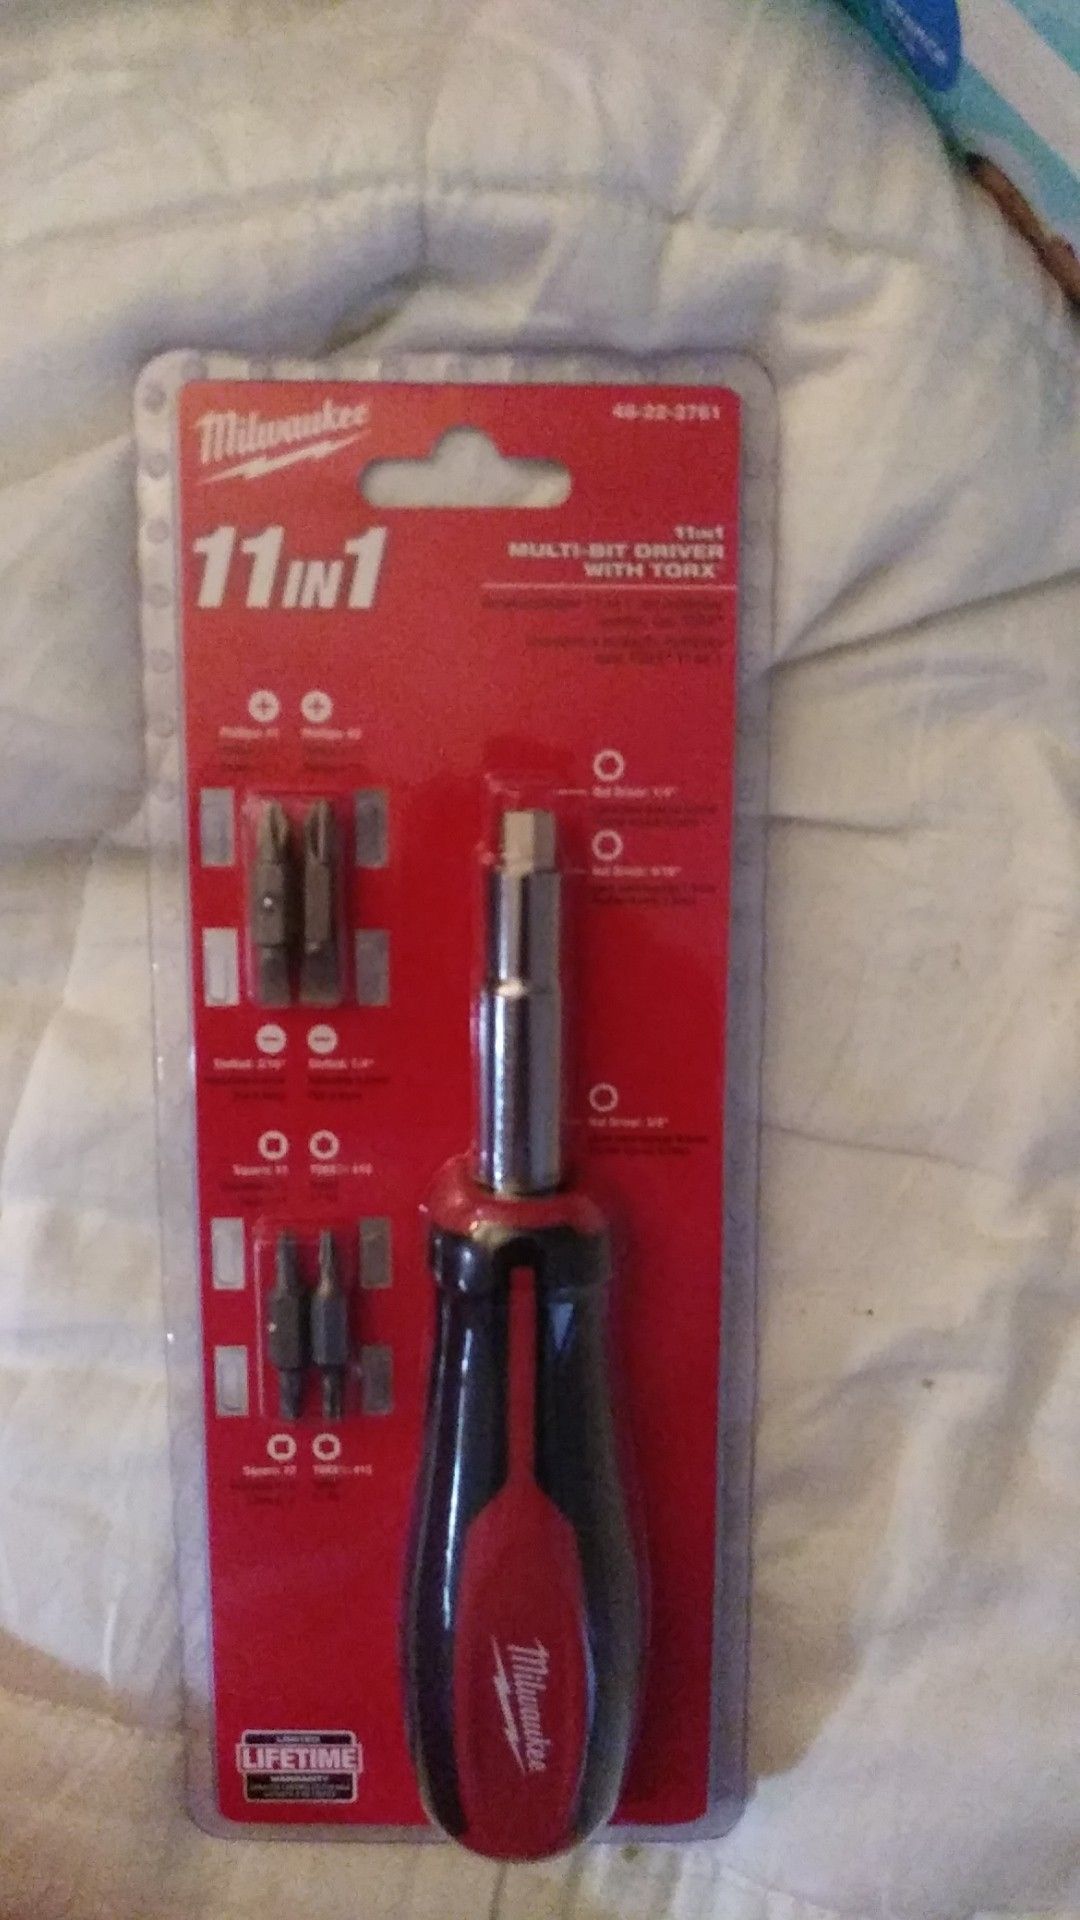 Milwaukee 11 in 1 multi bit driver with Torx